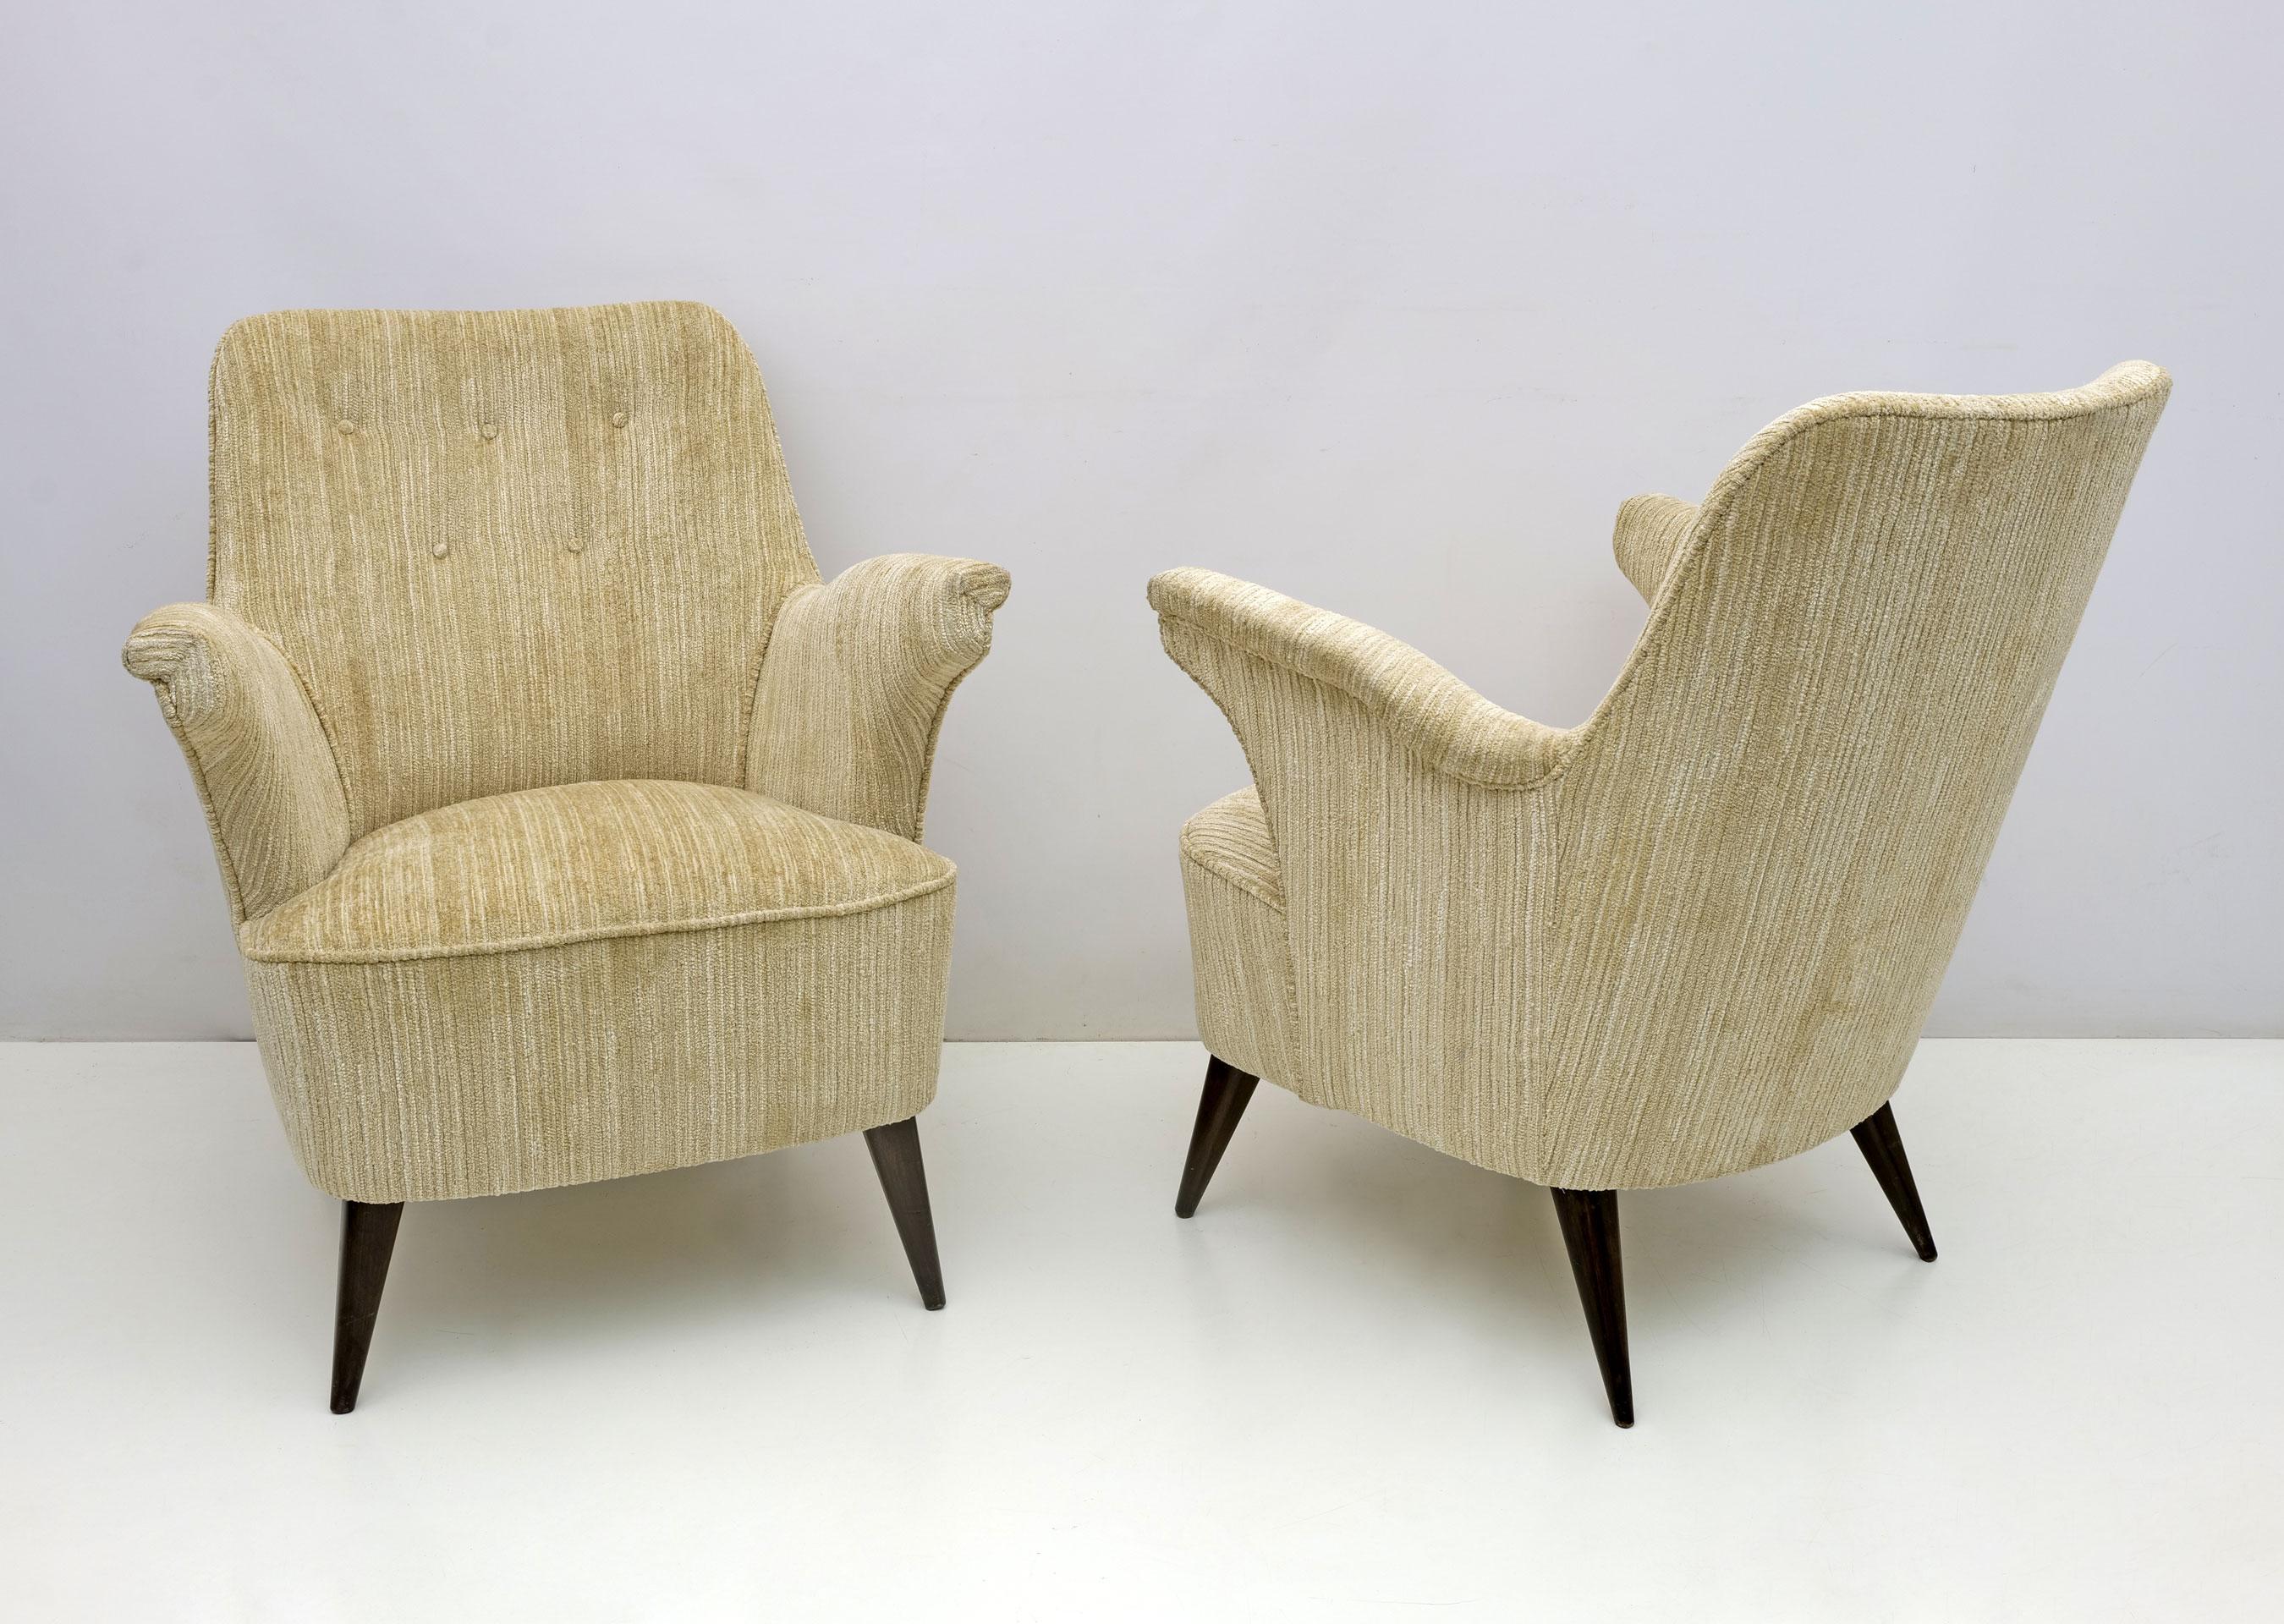 Pair of armchairs designed by Nino Zoncada and produced by Cassina in the 1950s, the armchairs have been recently restored and upholstered with ivory-coloured ribbed chenille, as shown in the photo.

The “Amedeo Cassina” company was officially